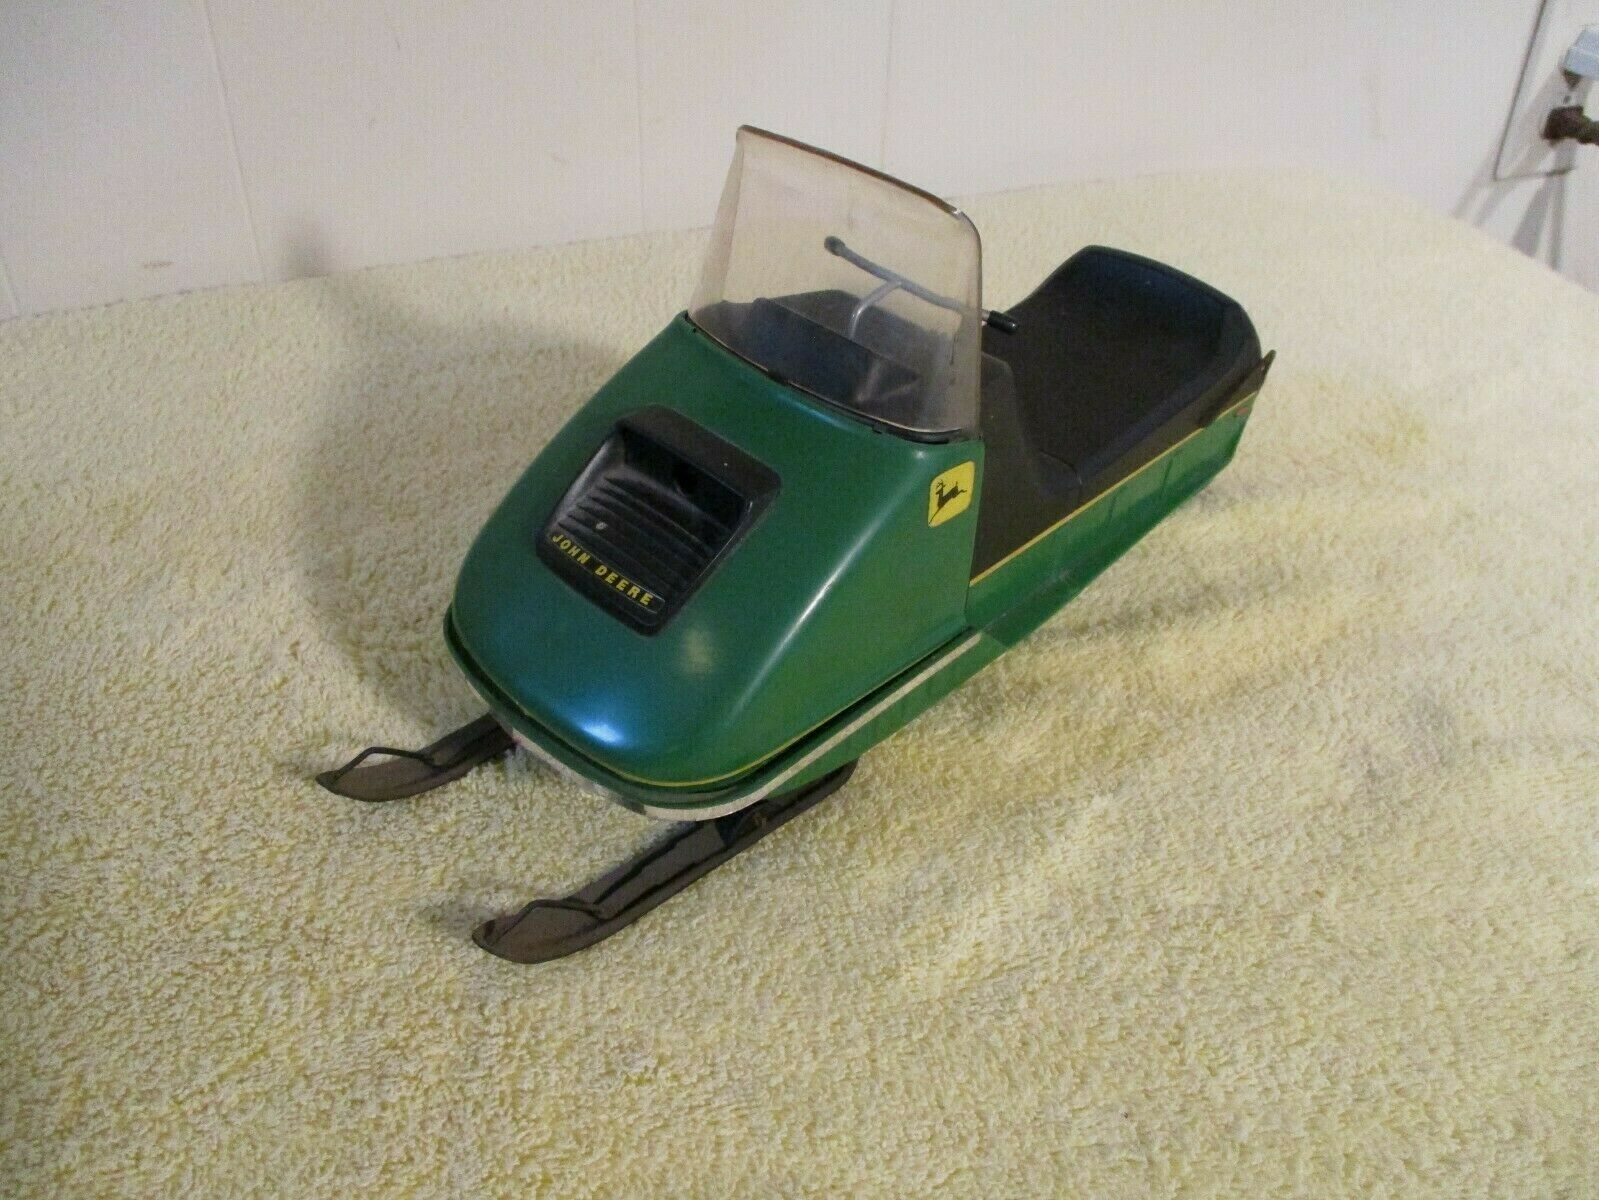 70's Rare John Deere Toy Green Snowmobile Battery Operated  12" Long Works Vgc